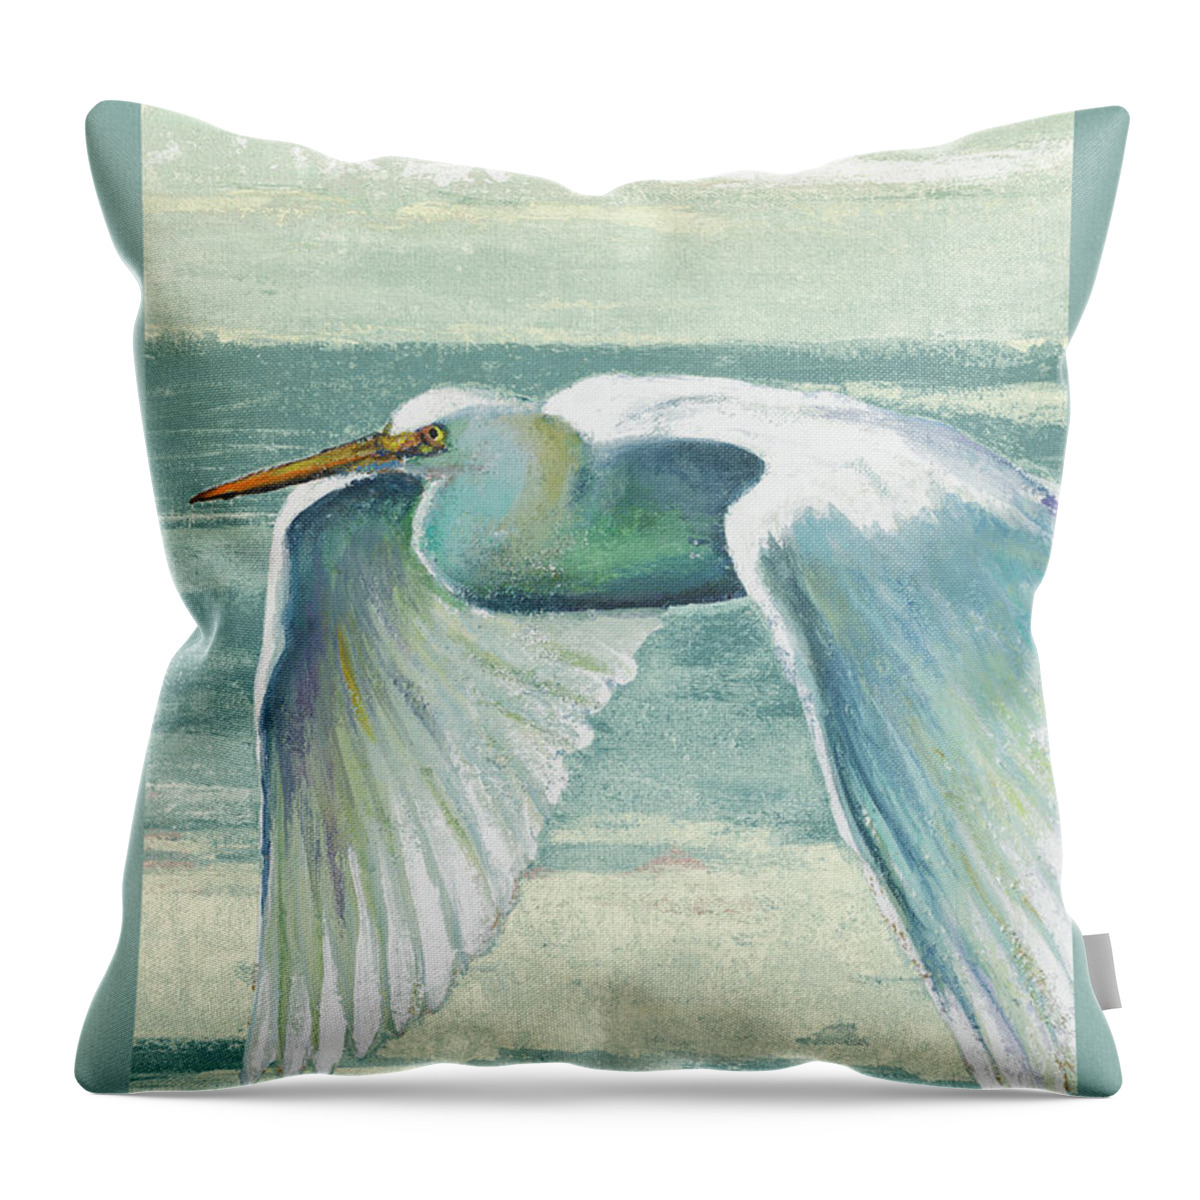 Everglades Throw Pillow featuring the painting Everglades Poster II by Patricia Pinto